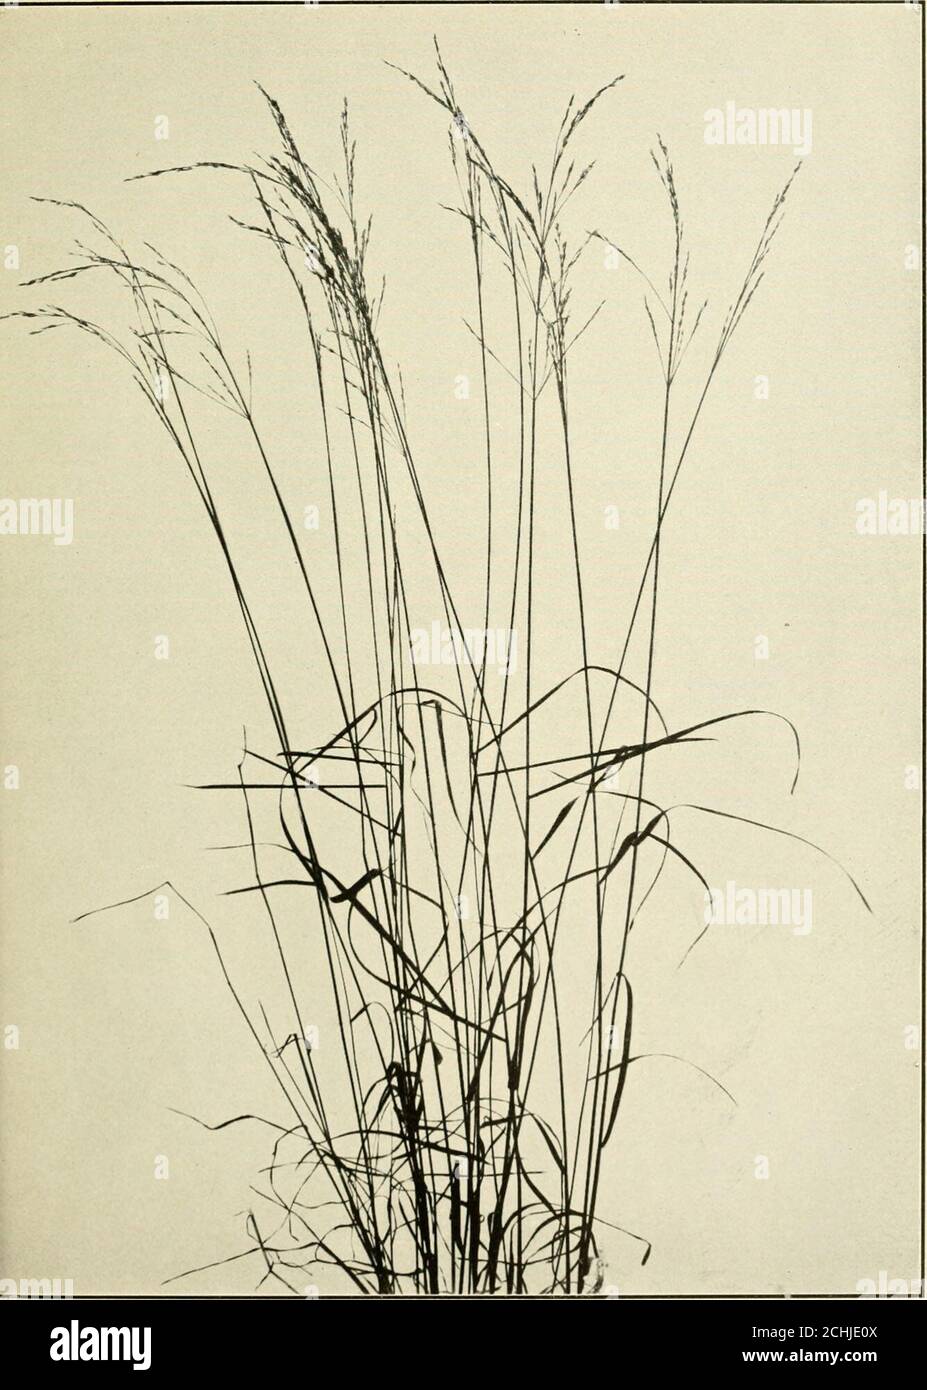 . The book of grasses : an illustrated guide to the common grasses, and the most common of the rushes and sedges . CAXAnA BLUE-GRASS {Poa compressa). One half natural size vS^ - V A *• t,, • .» .  ■■ -i !r V -&gt; V ^.-^ -&lt;. V ,J &lt;- ^ y .^ 1 ,^ V V ^ ^ . ^ ,. N P^S,. --V N ^ -v^ ^ ^ ■&gt; ■* -=^- -&gt;^S i/W/n./Zoral. Three ((uaru-rs natural size. WOOD SPEAR-GRASS (Poa sylvestris). Natural size Illustrated Descriptions of the Grasses phylla) are the earliest of the genus and are found in woodsfrom New York State southward. They bloom in March, whenthe first arbutus opens, and are slen Stock Photo